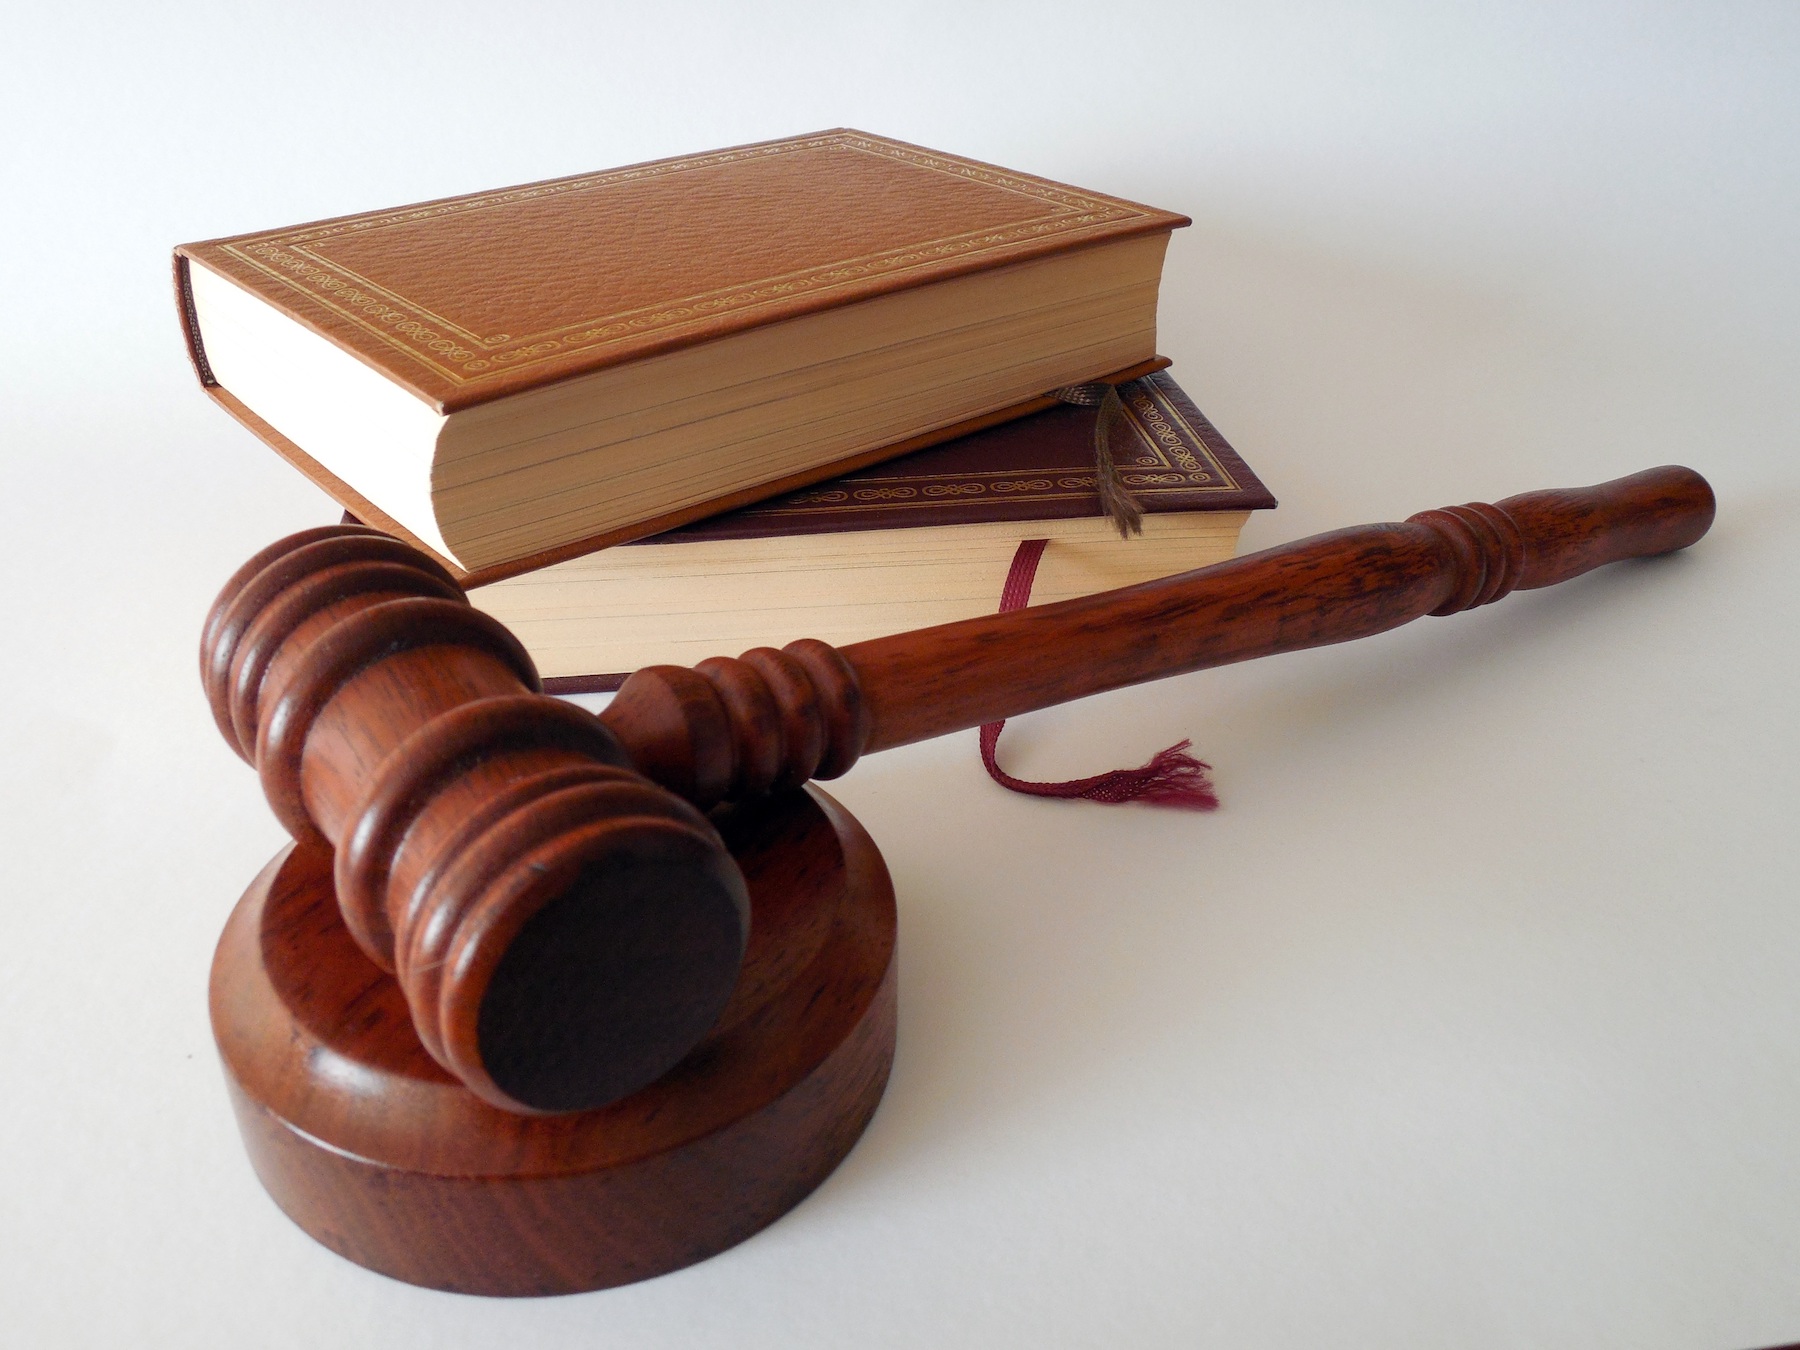 A Baton Rouge injury lawyer can support you in court if necessary